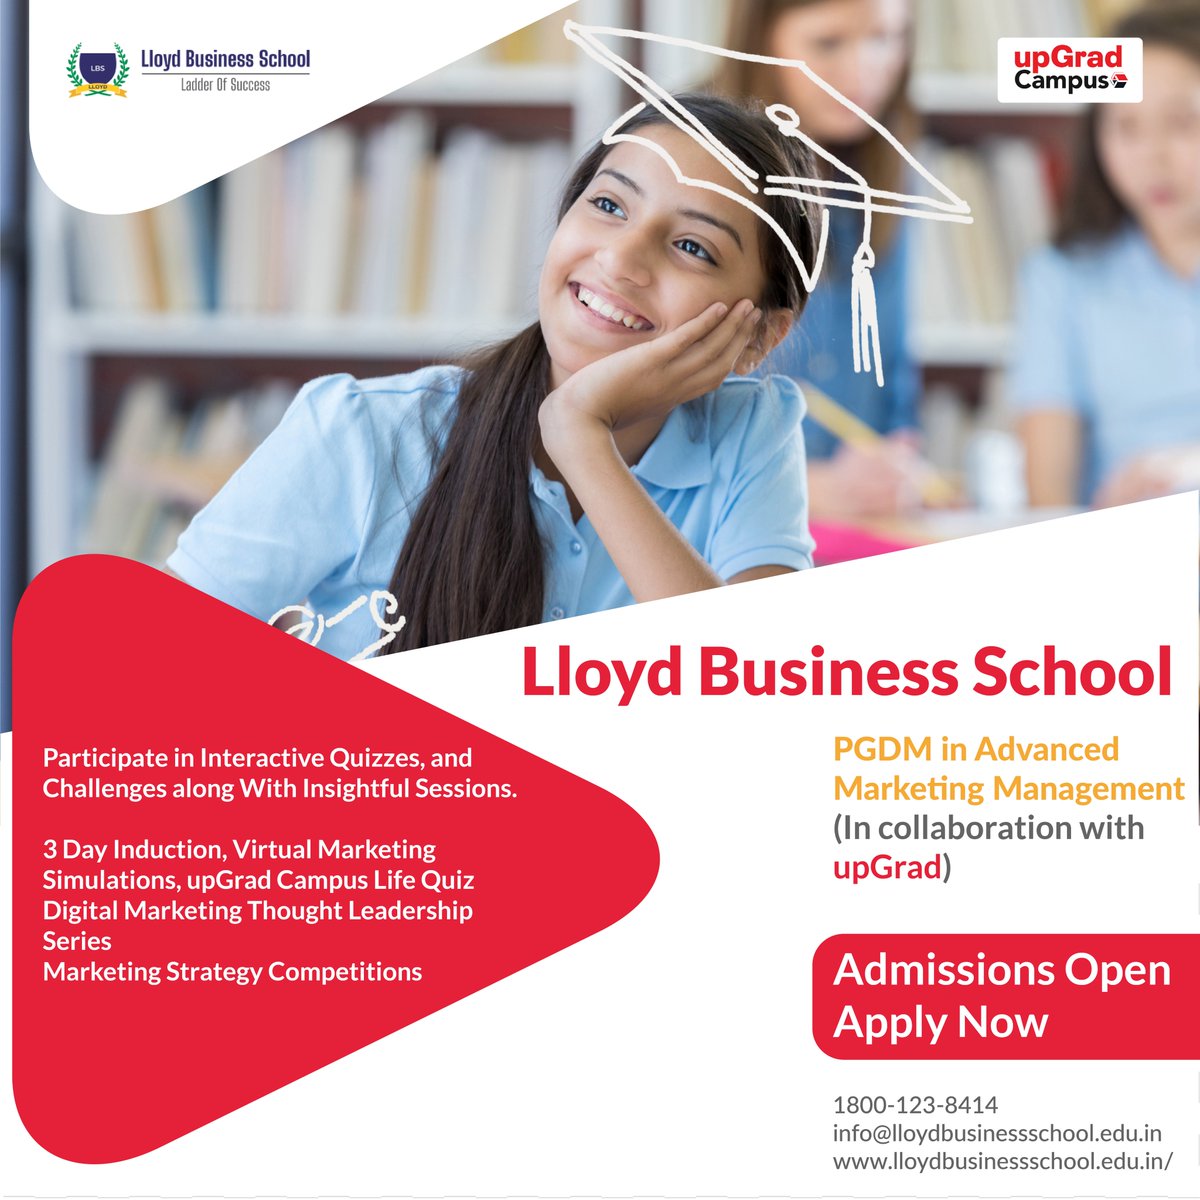 Lloyd Business School is proud to announce PGDM Specialisation in Advanced Marketing Management - a 2 year course in association with upGrad. Enroll in course now for a career in the world of Marketing, Digital Marketing, Advertising and Promotion, SEO Specialist etc.
#SEOExpert